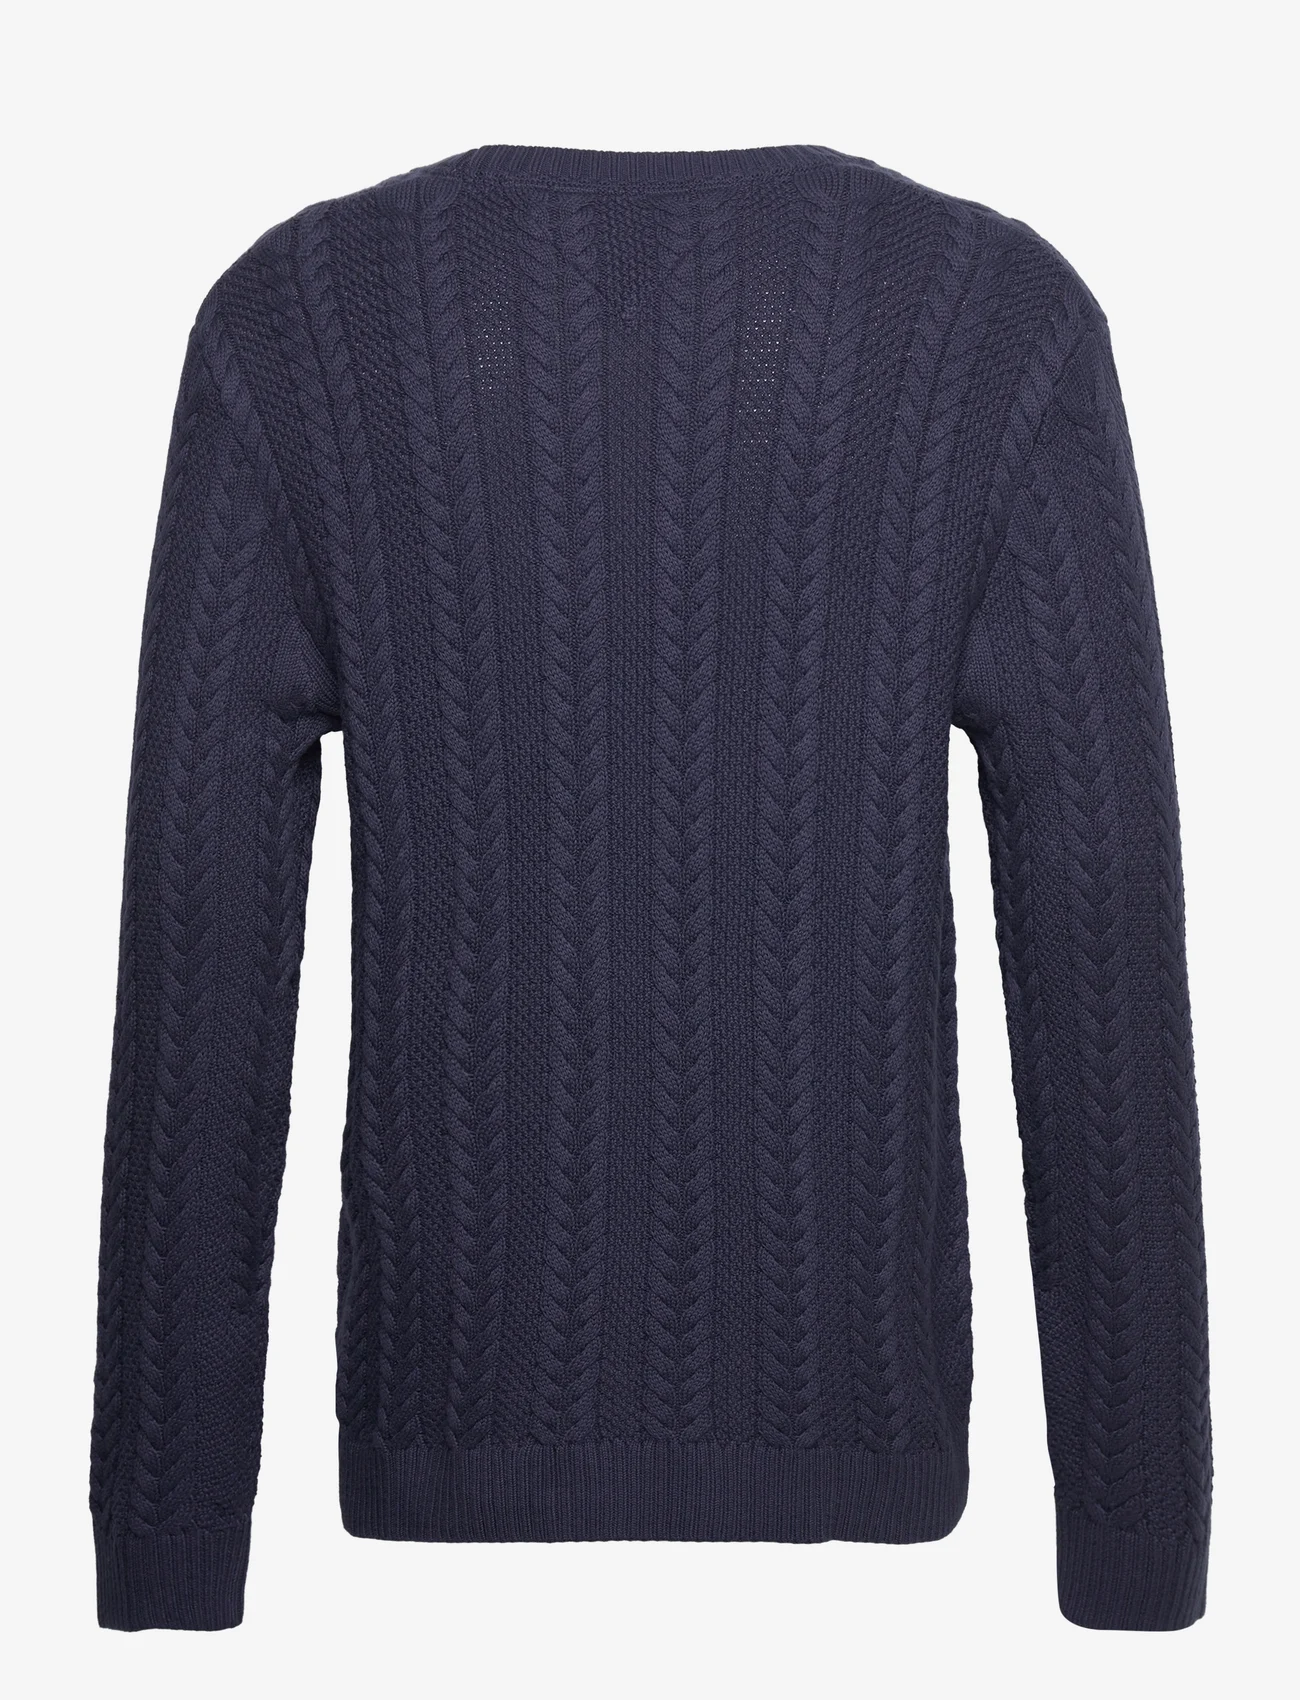 Tommy Jeans - TJM REG CABLE SWEATER - rundhalsad - twilight navy - 1